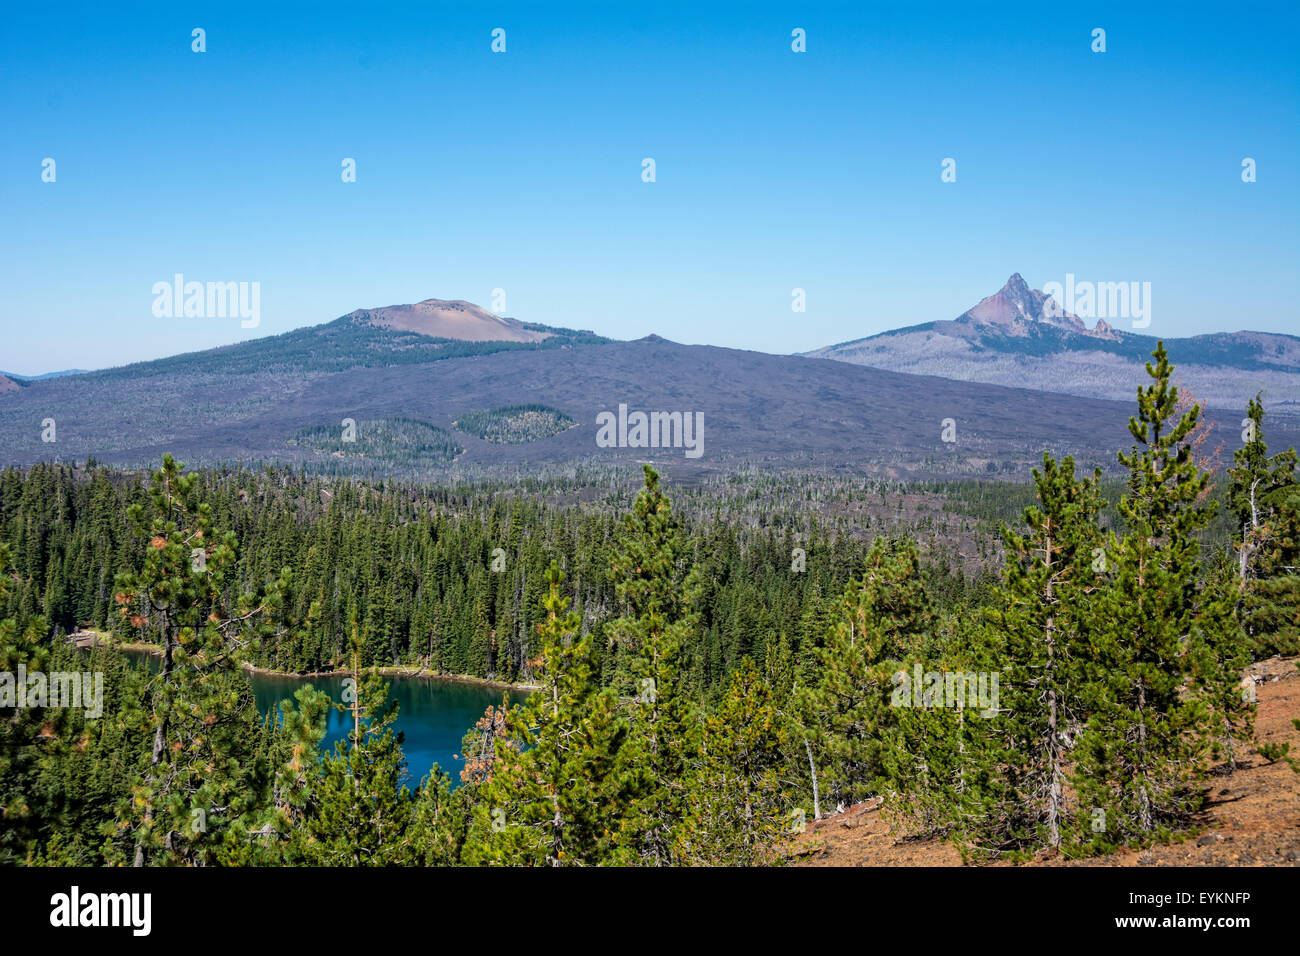 North Matthieu Lake, Belknap Crater and Mount Washington, from Pacific Crest Trail, Three Sisters Wilderness, Cascade Moutains, Stock Photo